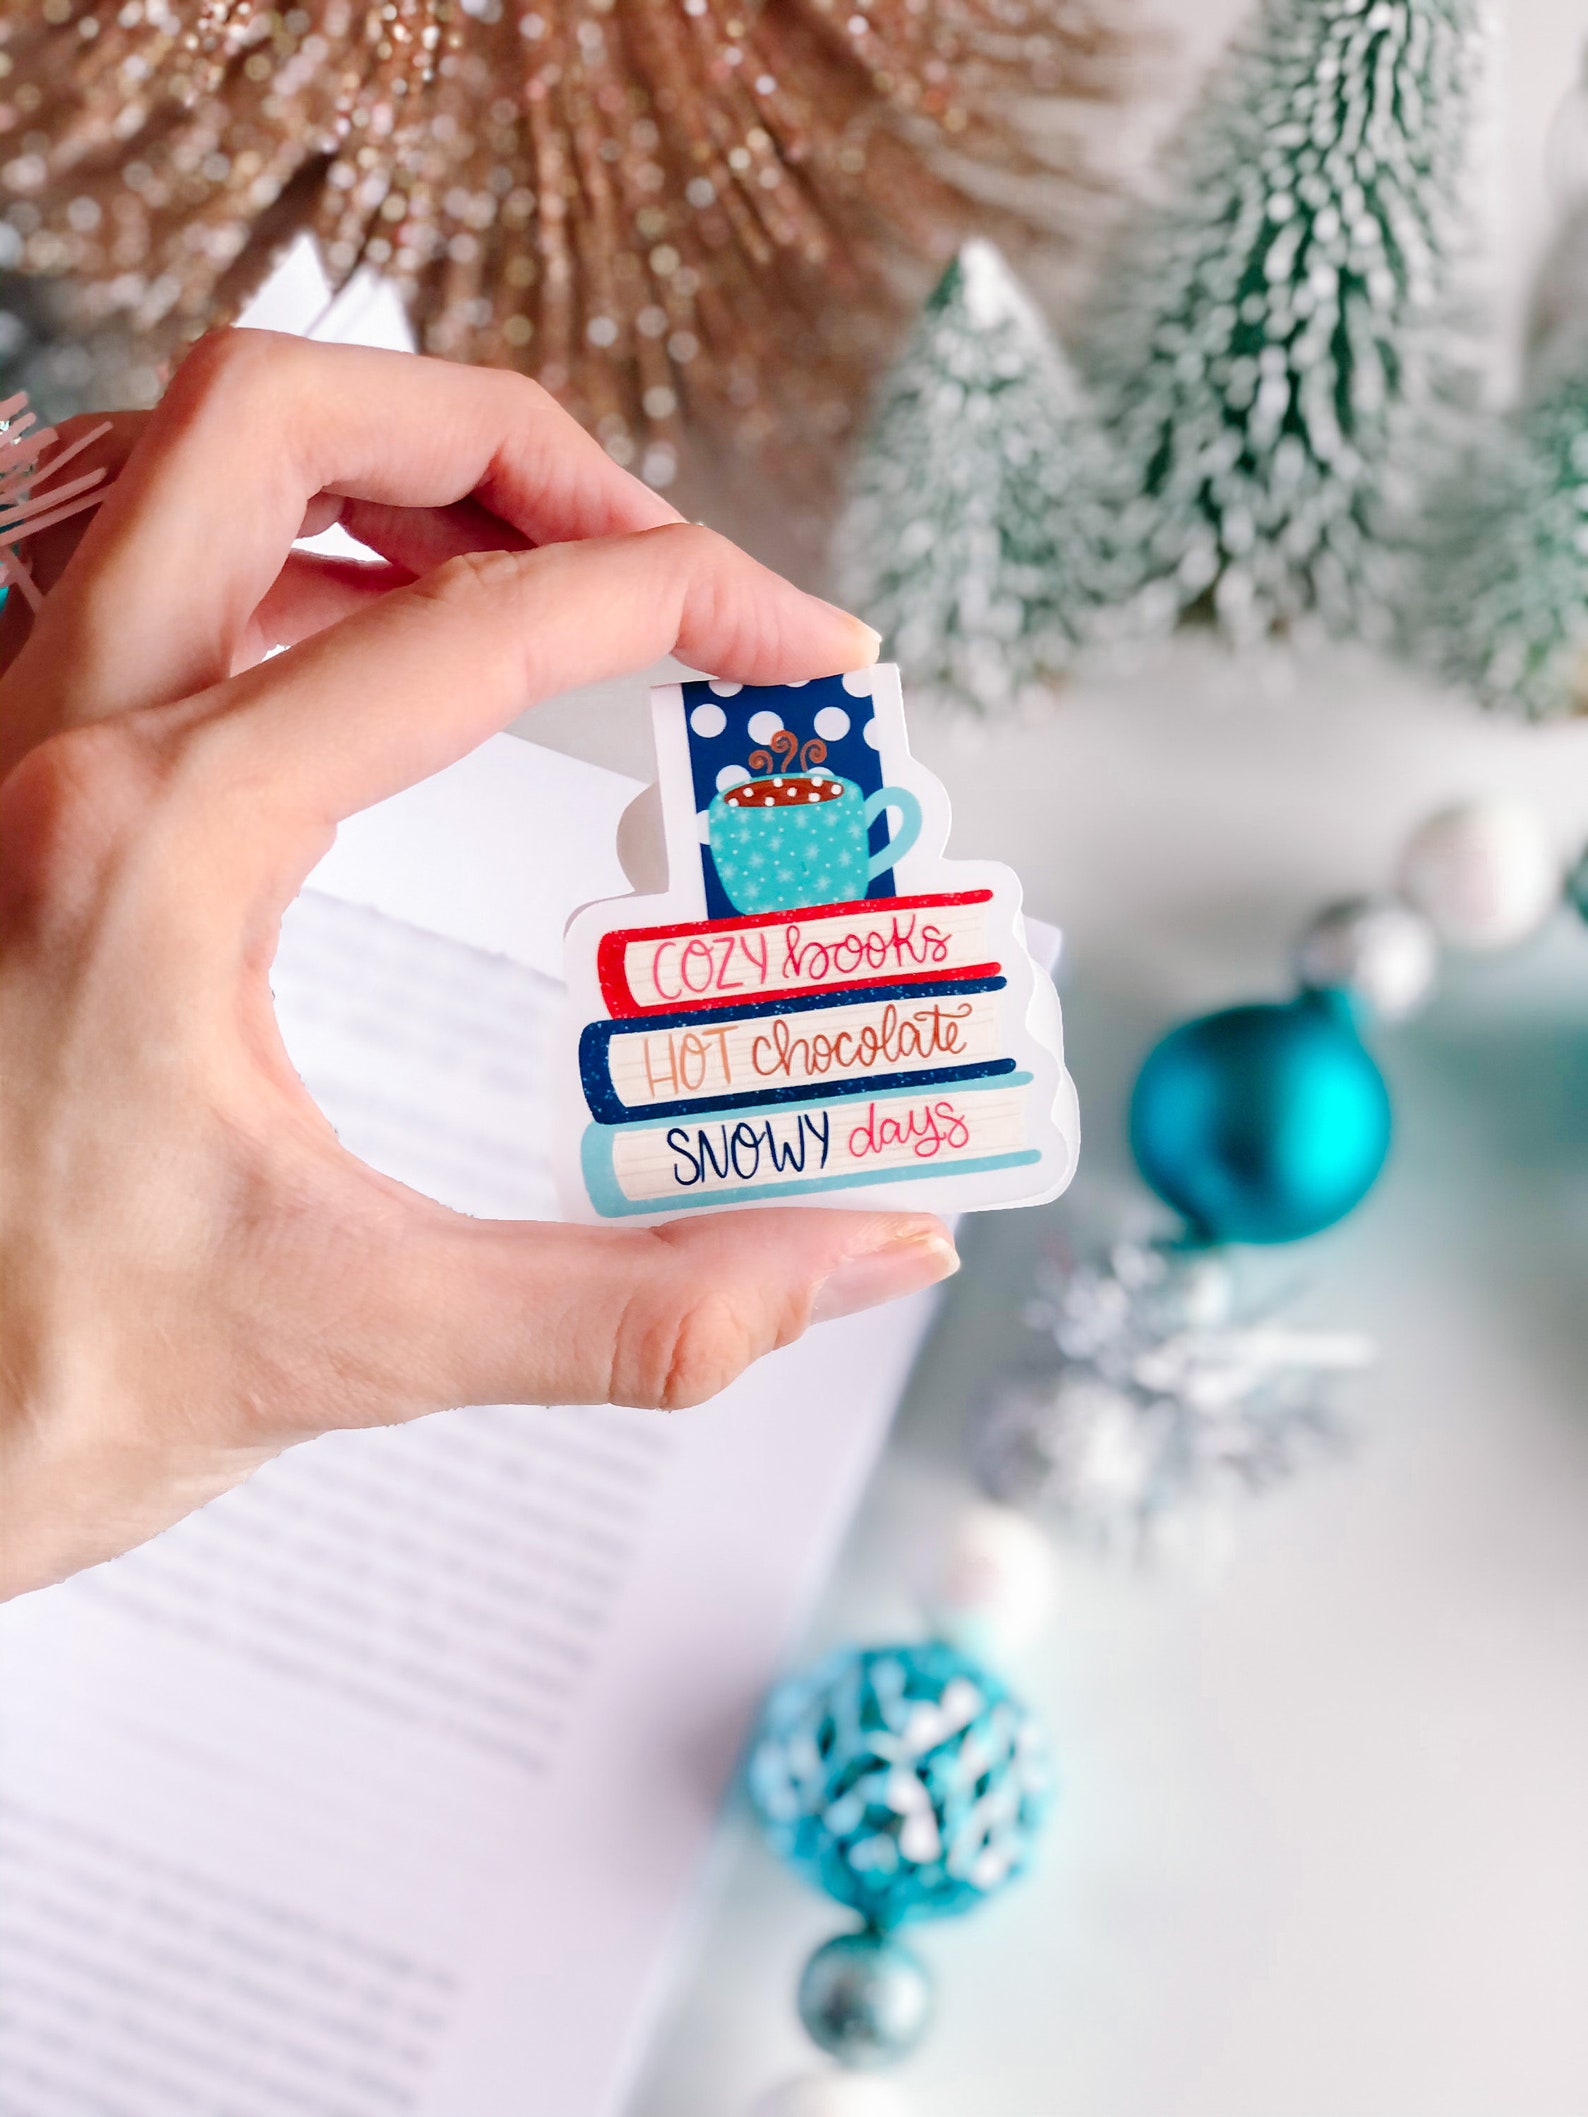 A magnetic bookmark depicting a colorful stack of books and a steaming cup of hot cocoa that reads "Cozy books, hot chocolate, snowy days"